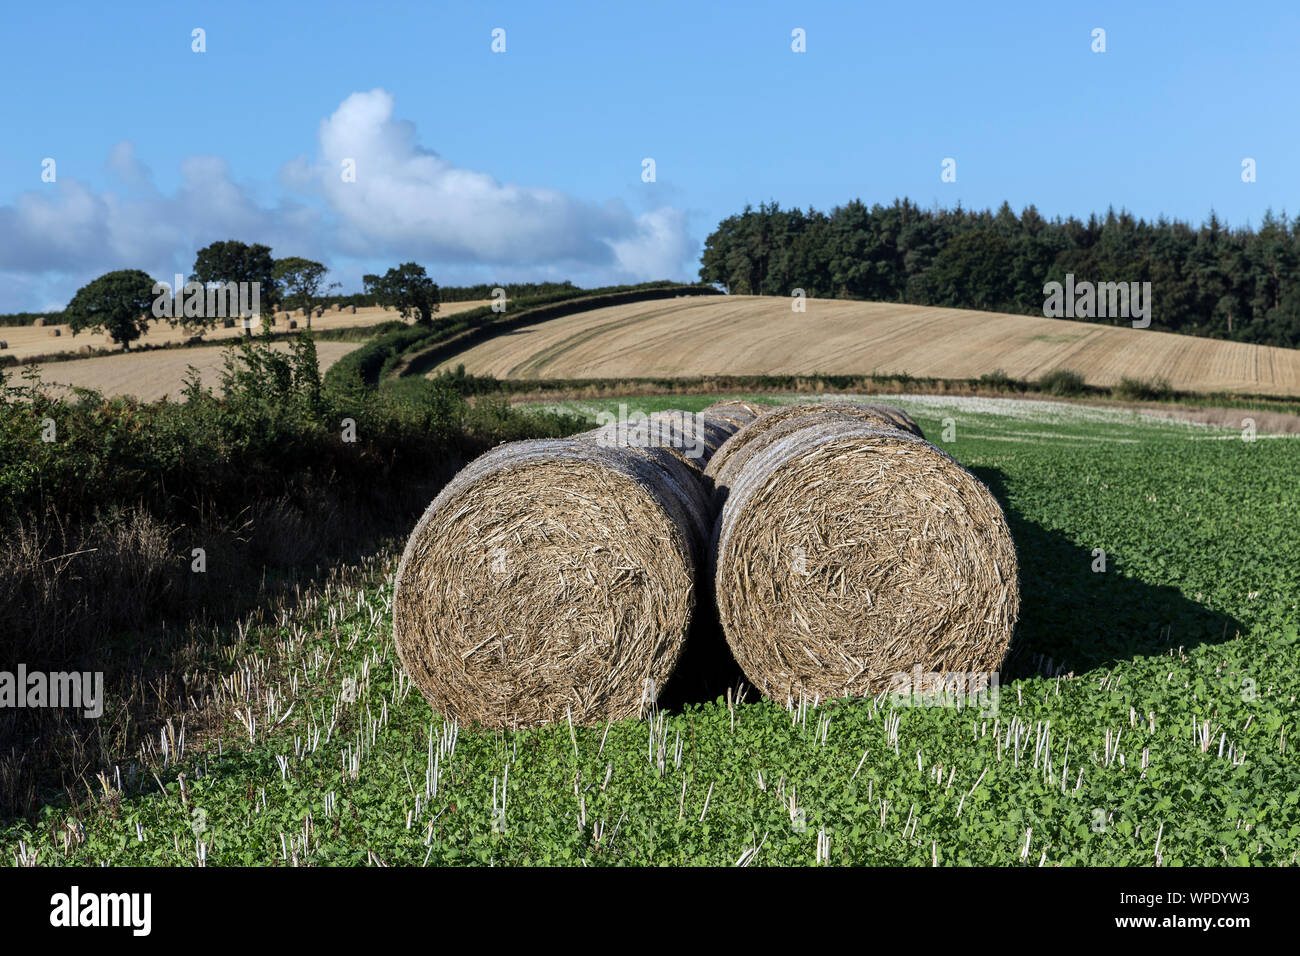 Bale, Hay, Agricultural Field, Farm, Circle, Straw, Summer, Agriculture, Barbed Wire, Barley, Blue, Cereal Plant, Cloud - Sky, Color Image, Cricket St Stock Photo